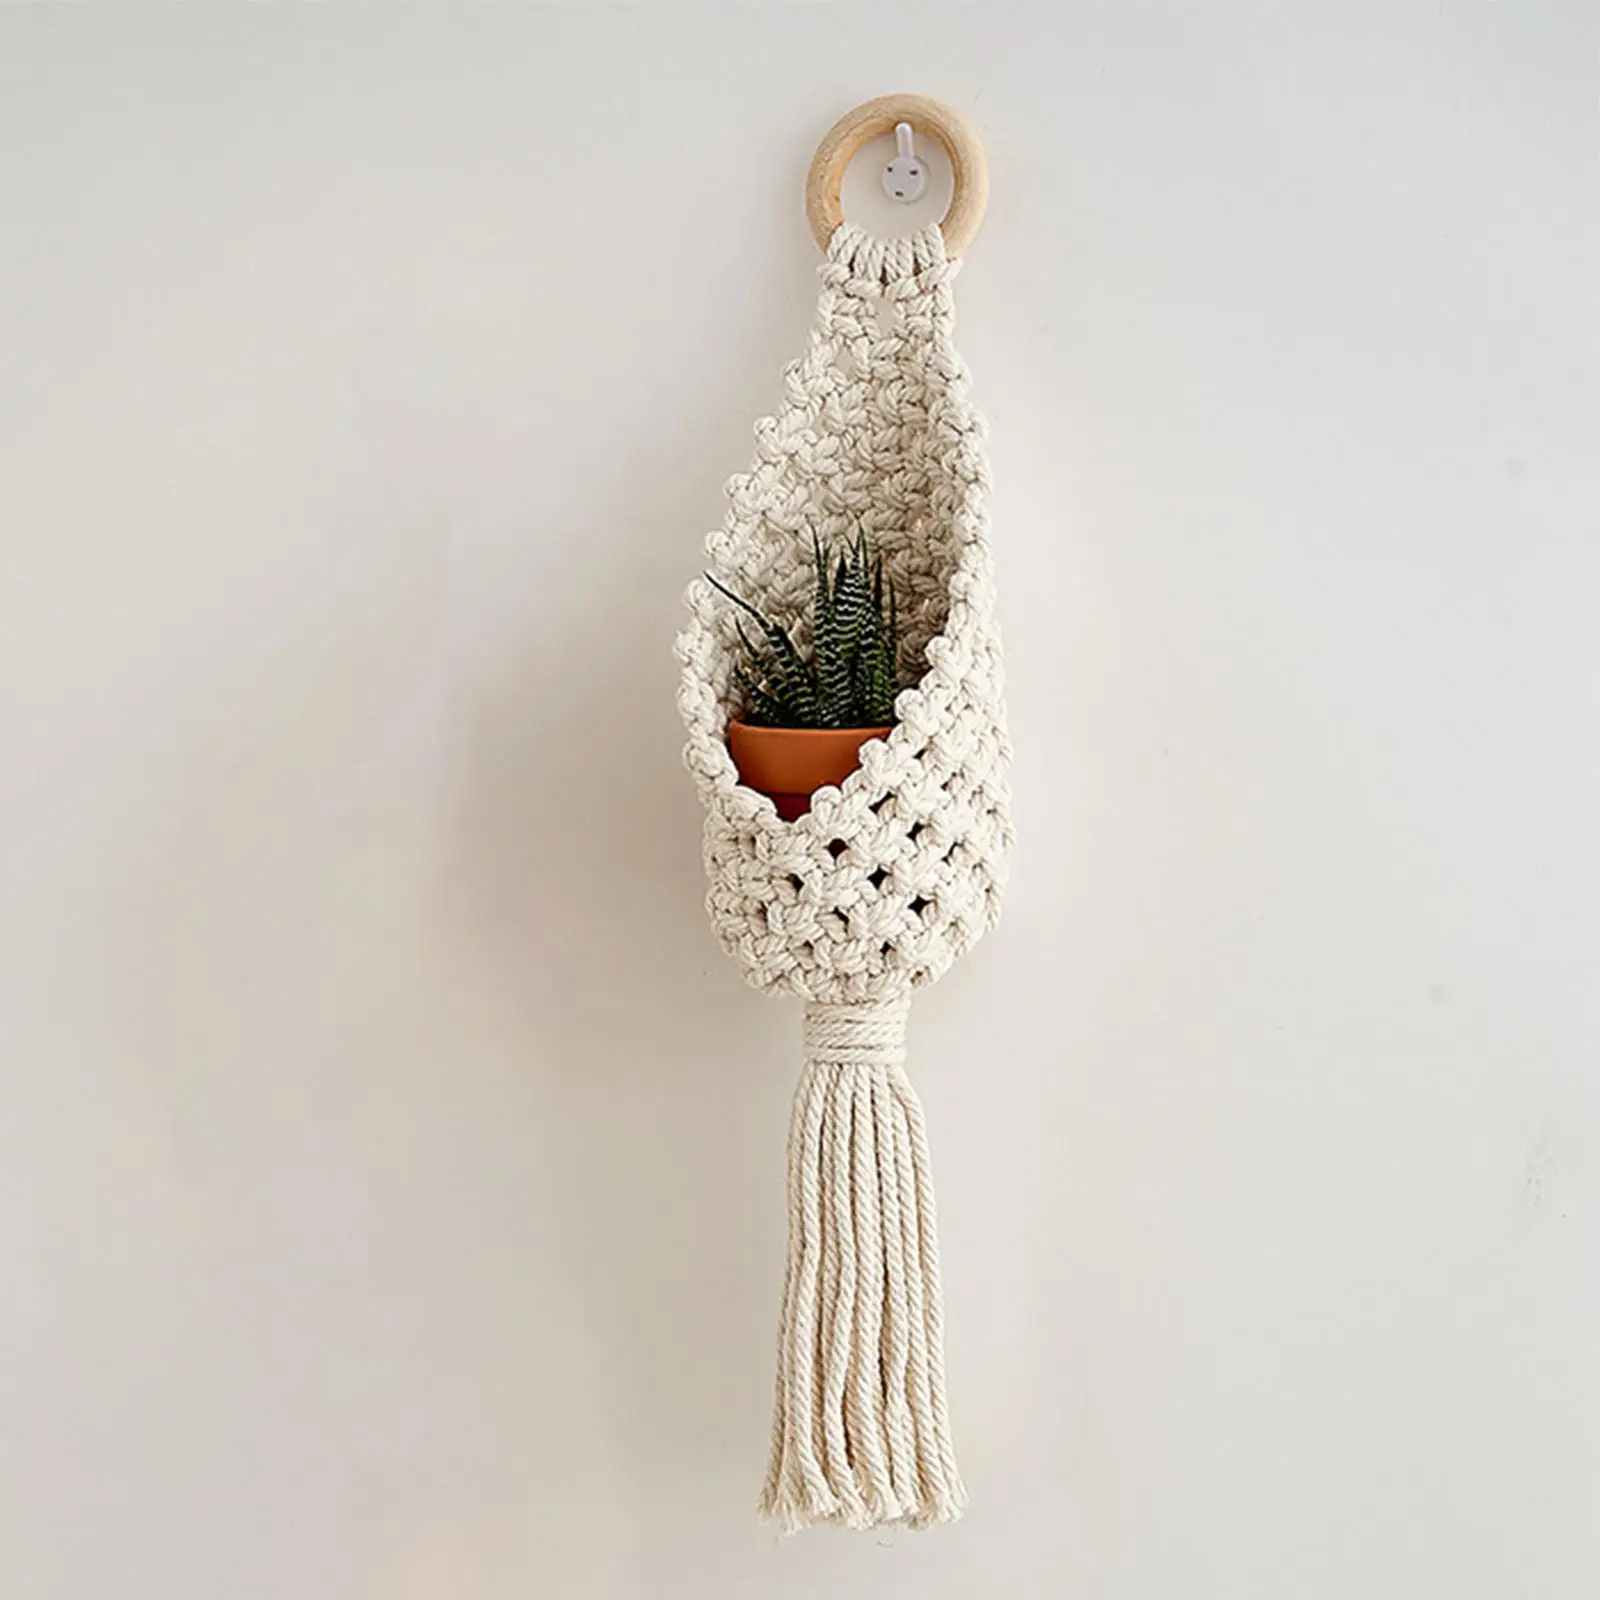 Boho Hanging Wall Vegetable Fruit Baskets Portable Woven Hanging Onion Basket for Garden Supplies Landscaping Office Wall Decor